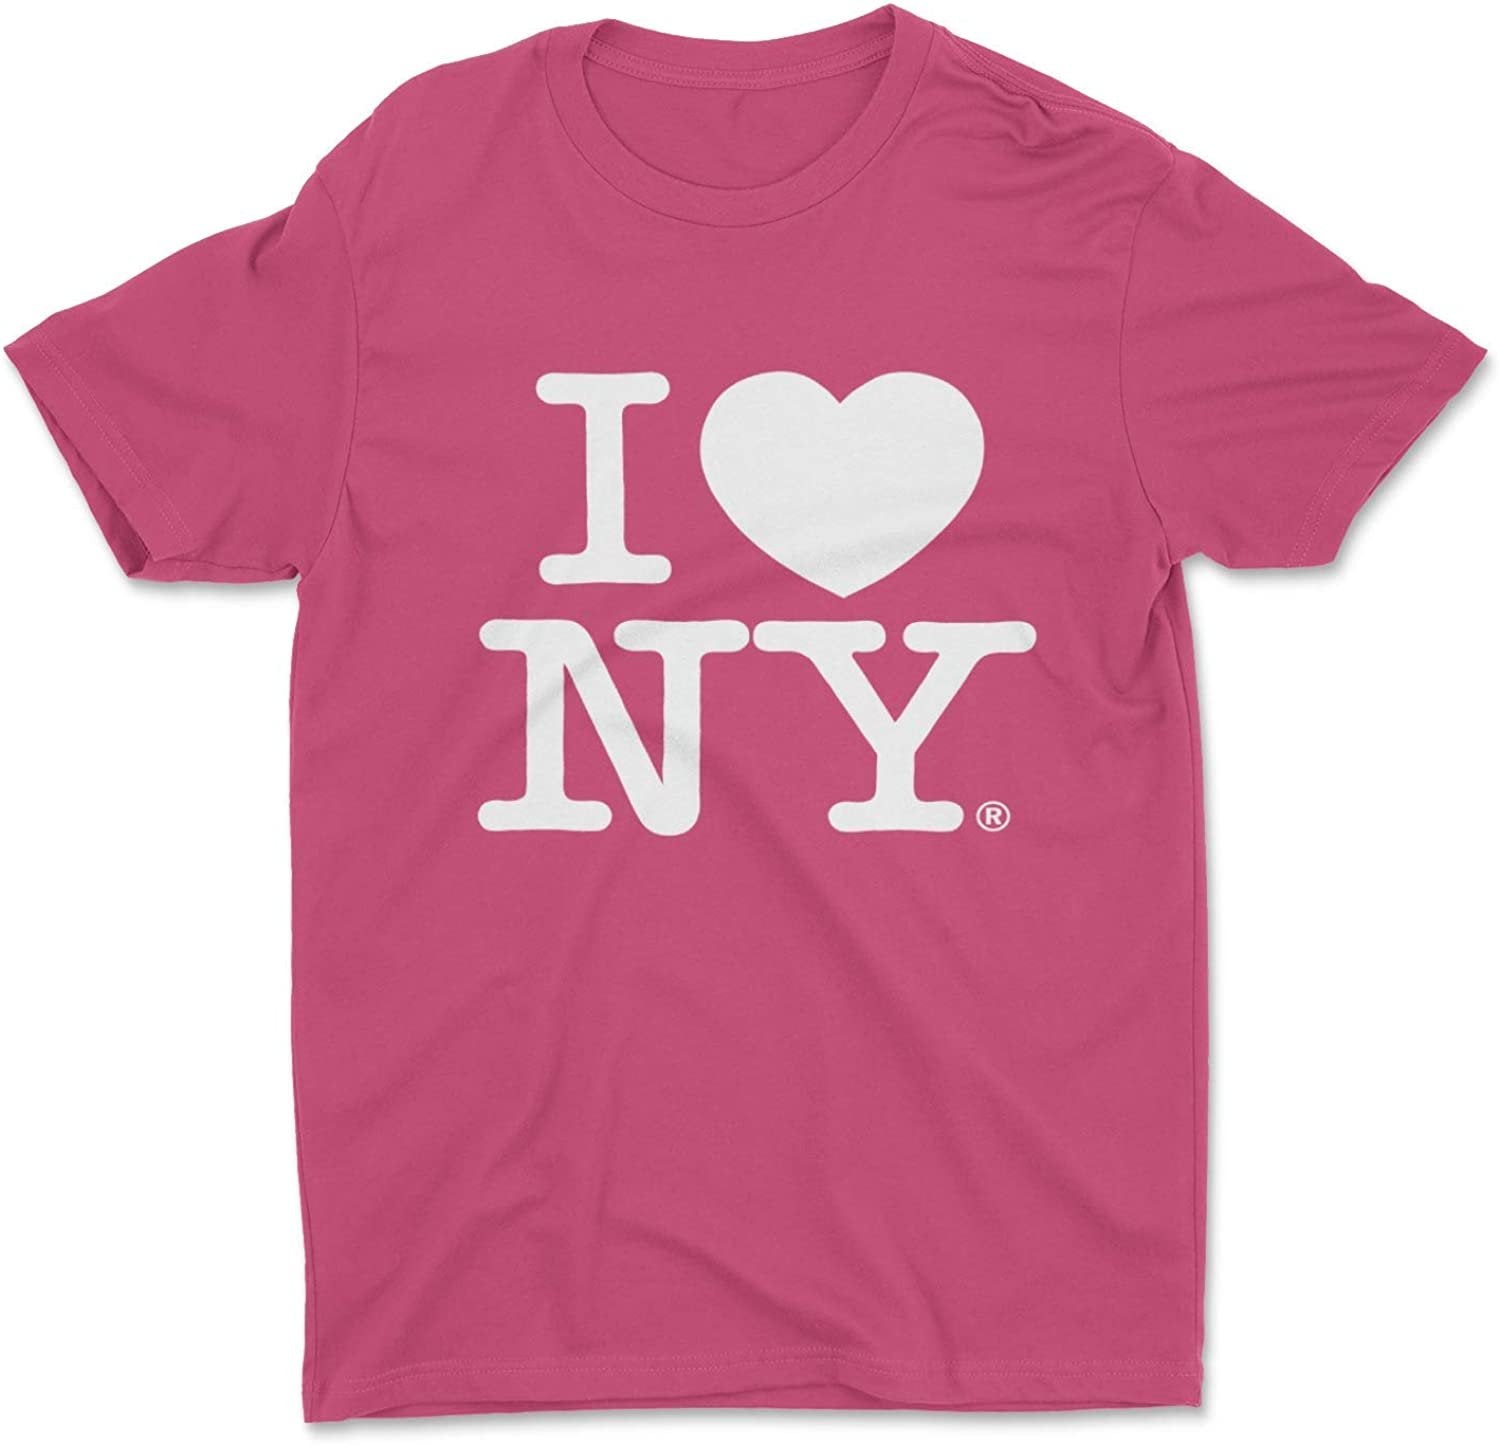 I Love NY Kids T-Shirt Officially Licensed Unisex Tees (Youth, Rasberry)